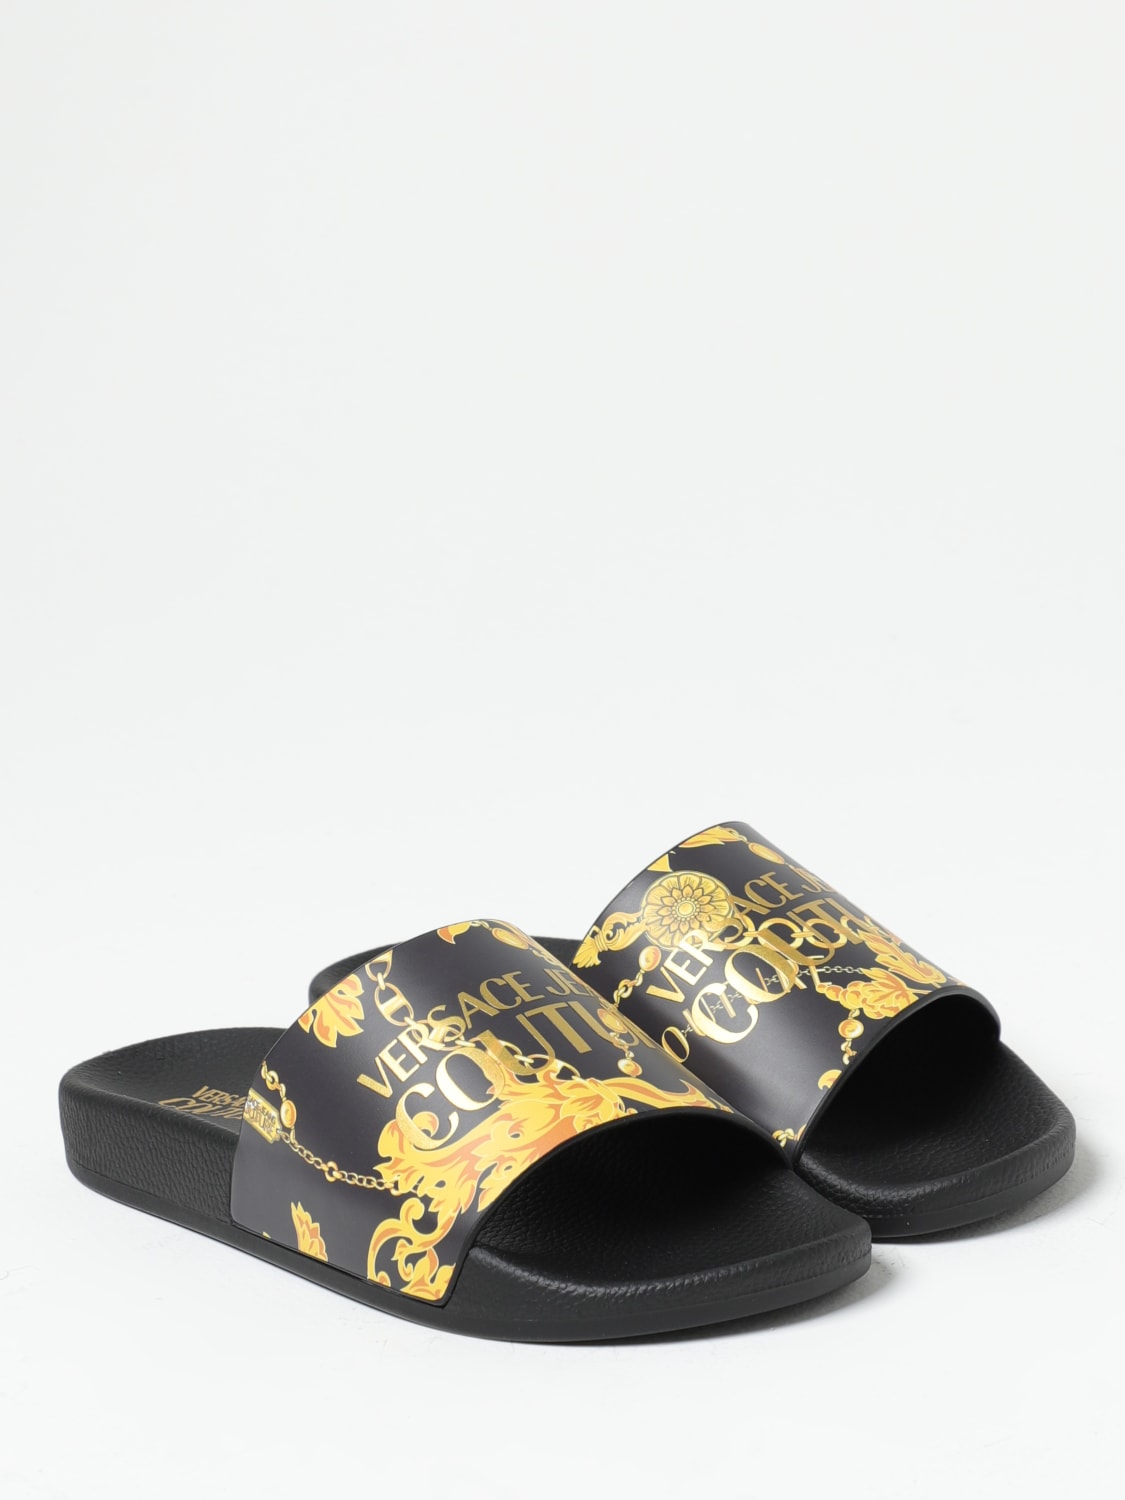 VERSACE JEANS COUTURE：サンダル メンズ - ブラック | GIGLIO.COM ...